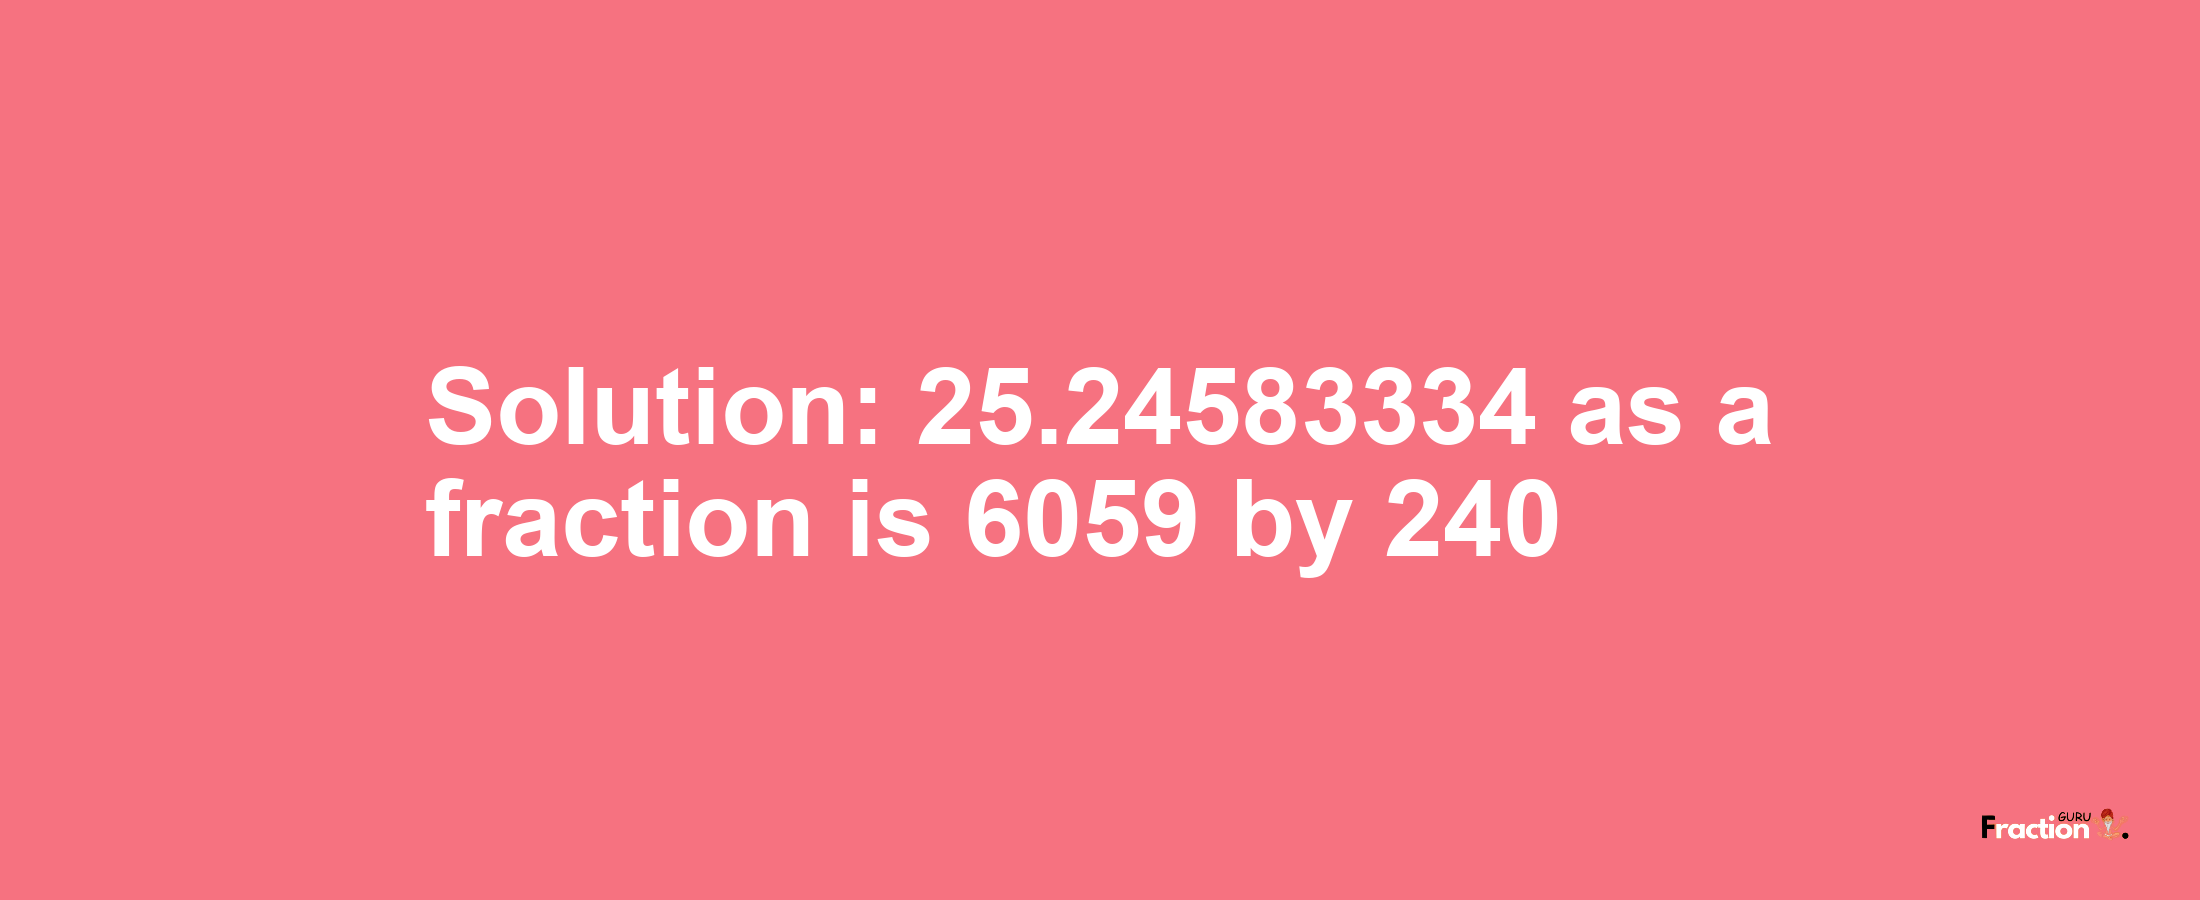 Solution:25.24583334 as a fraction is 6059/240